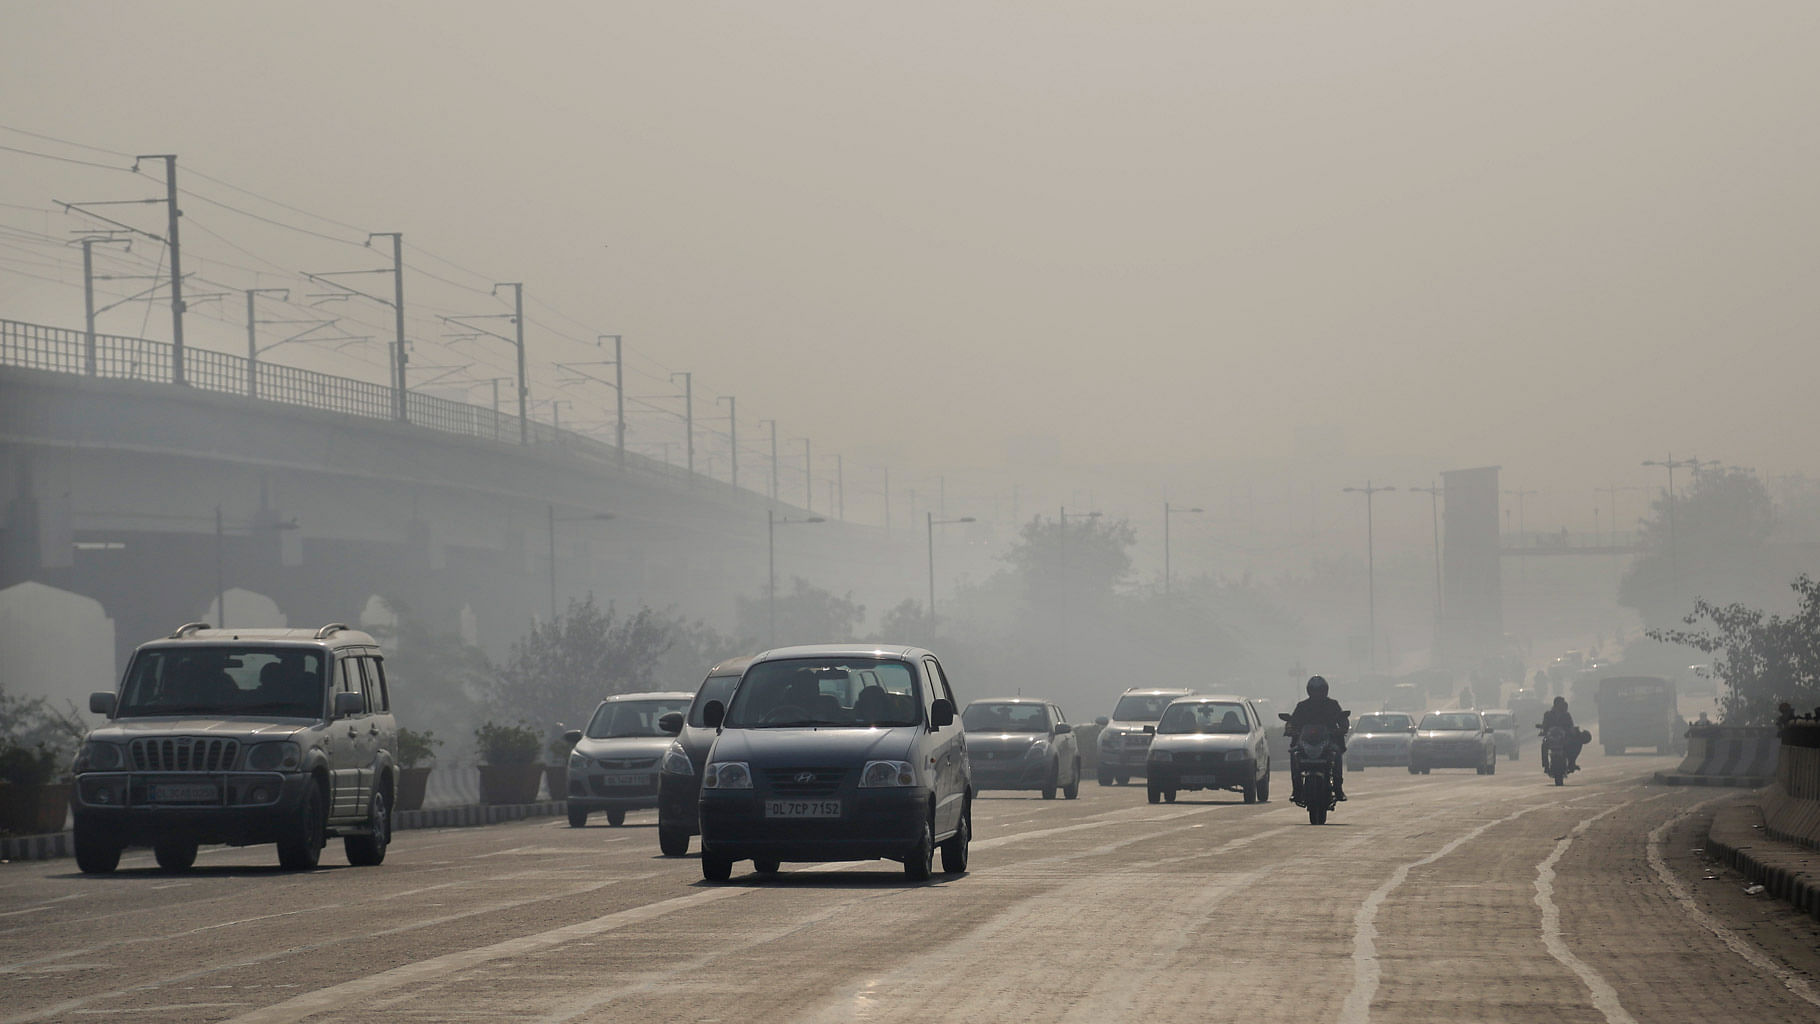 41 cities with more than 1 million population reported bad quality air in 2015, according to the Central Pollution Control Board (CPCB).&nbsp;(Photo: AP)